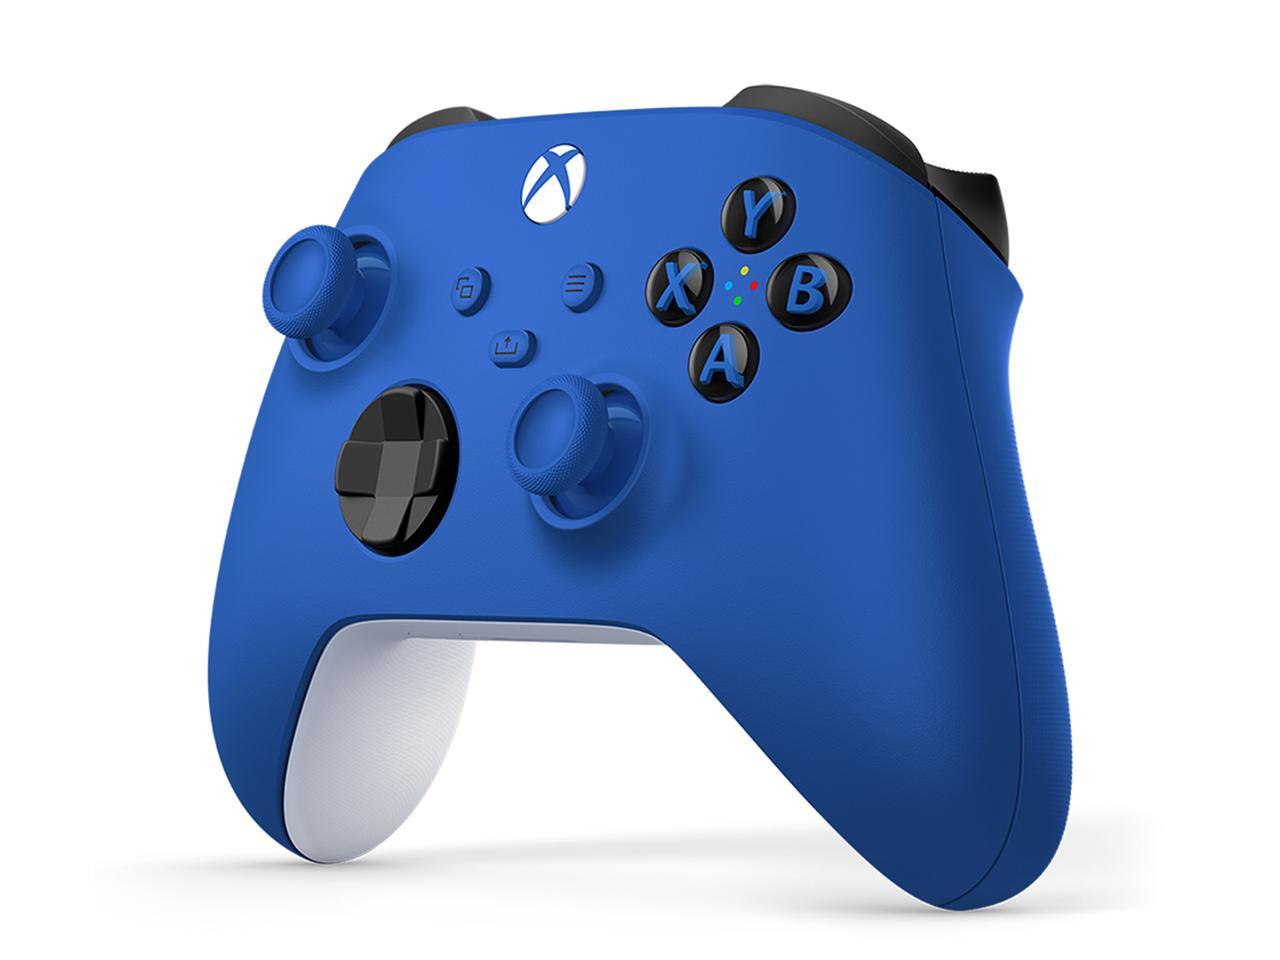 Xbox Wireless Controller - Shock Blue - image 3 of 6